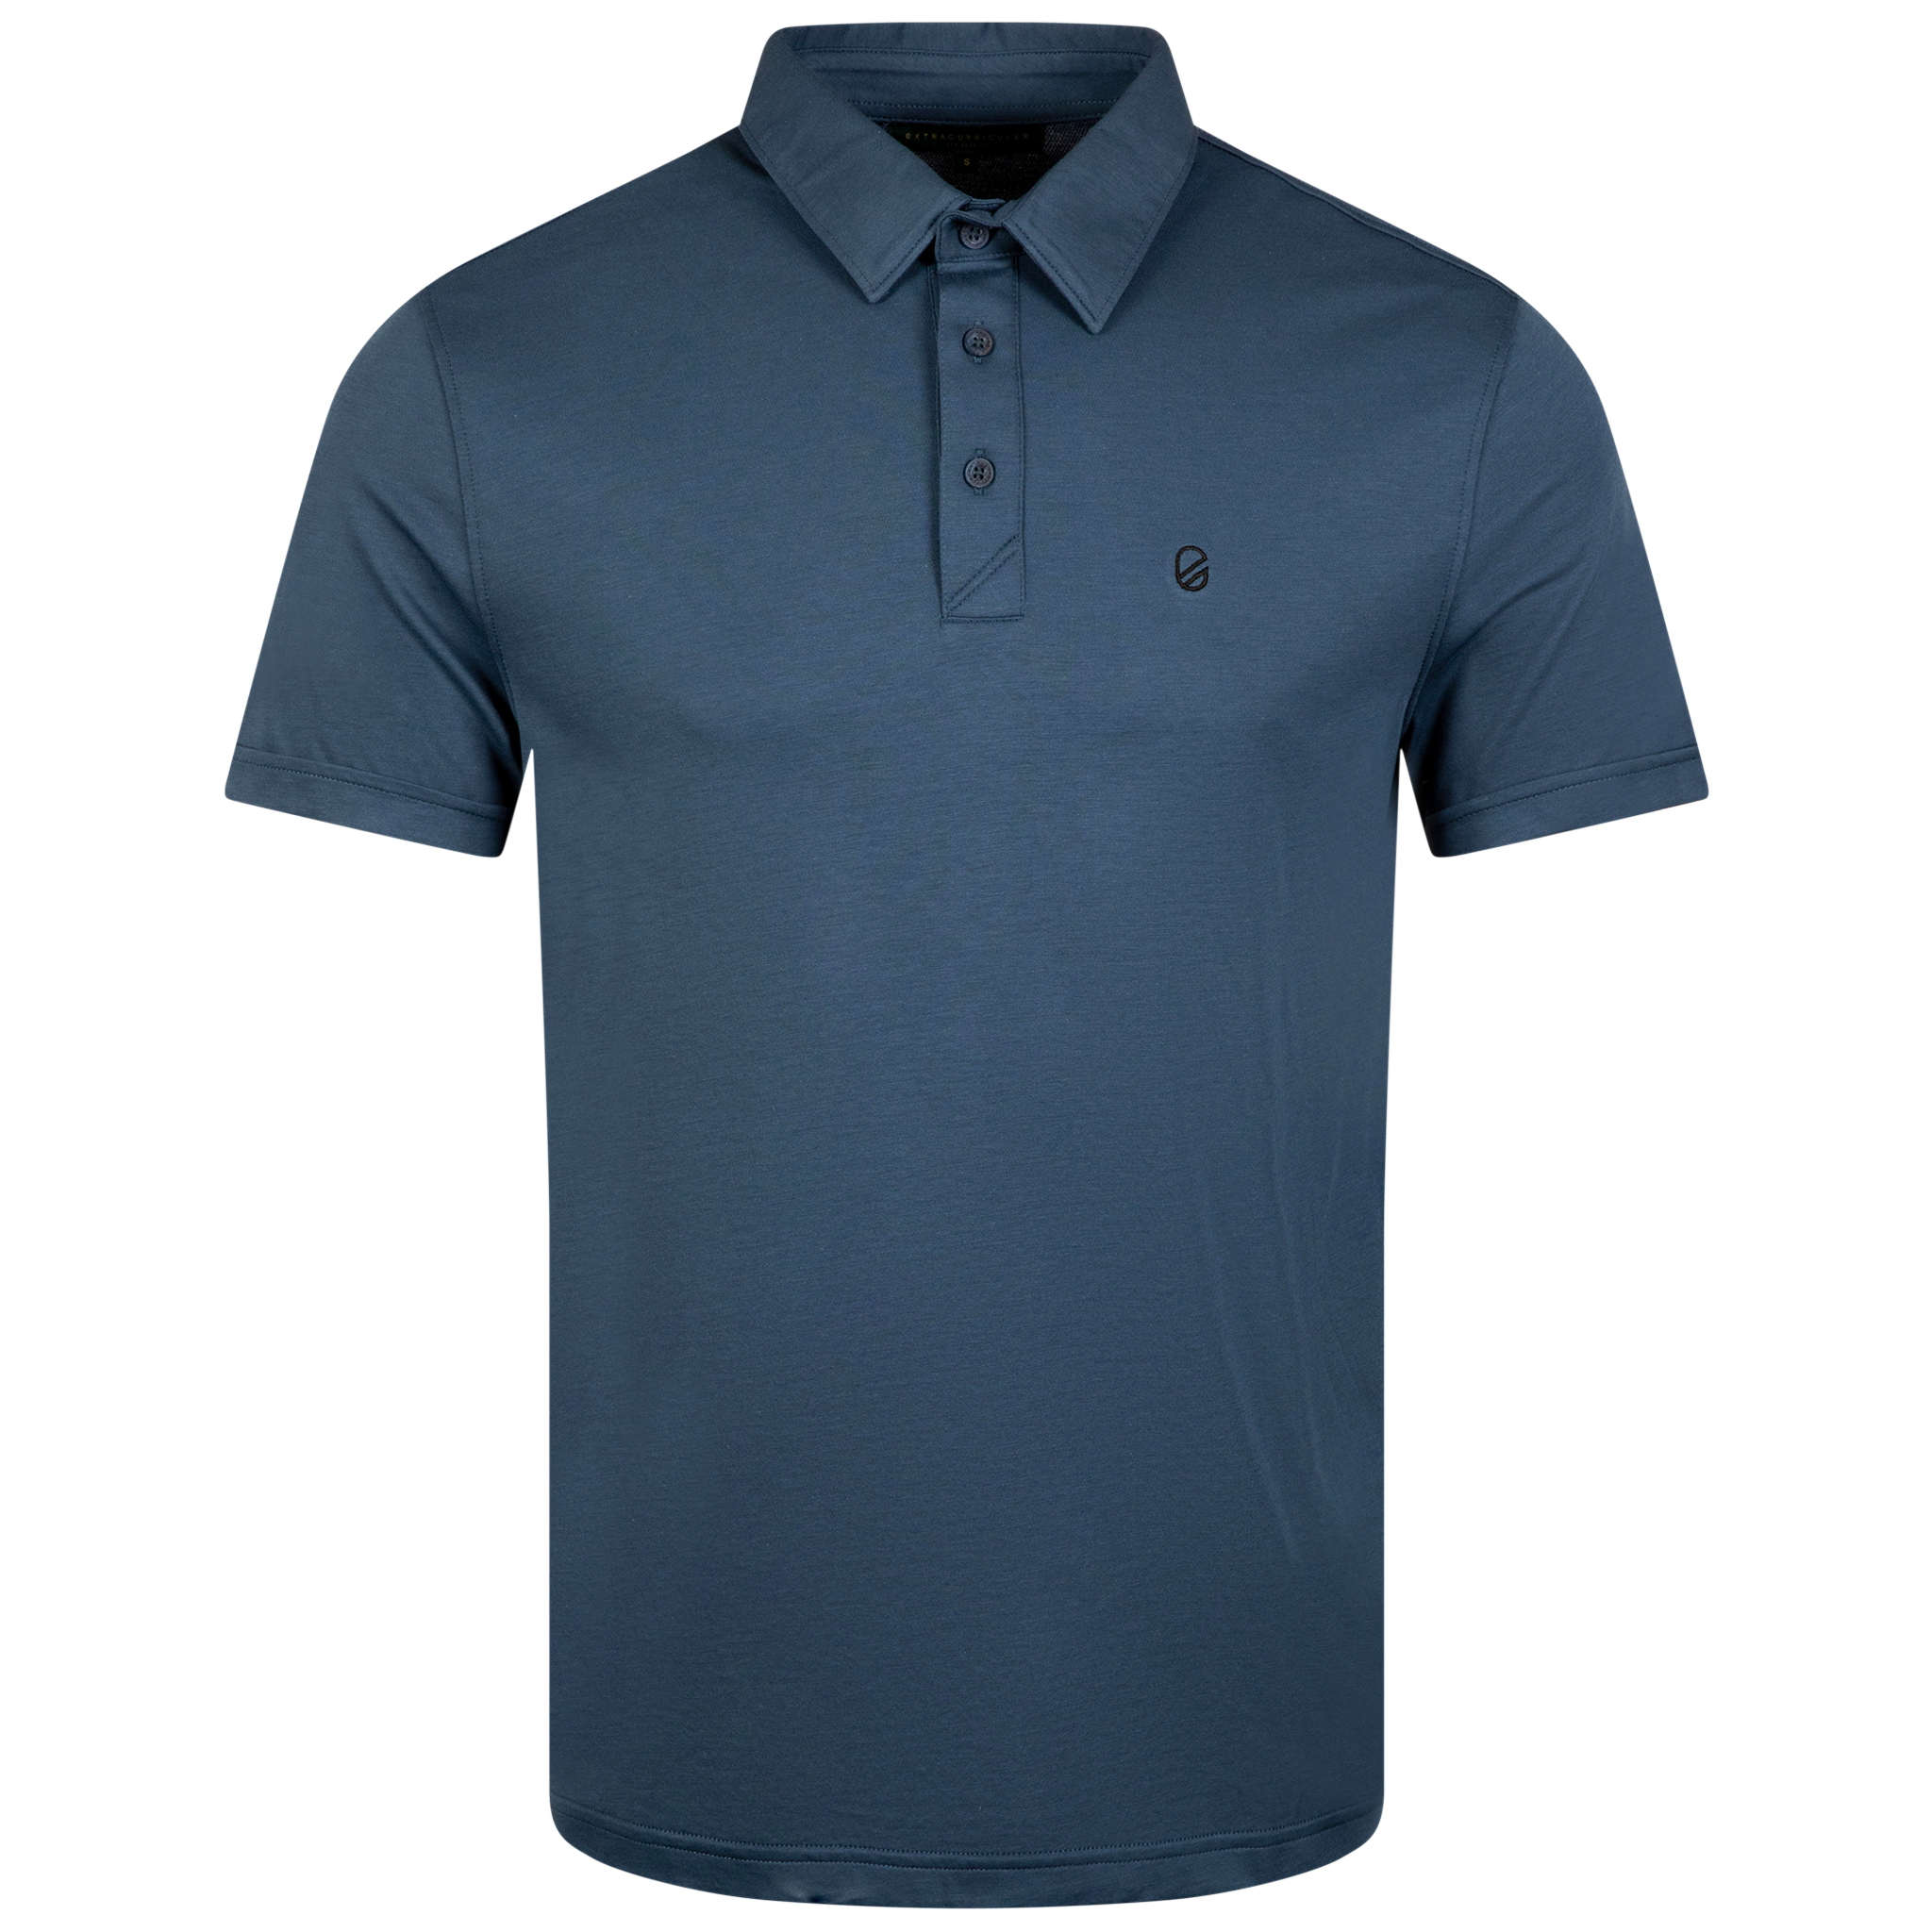 EXTRA POLO | BLUE WING TEAL